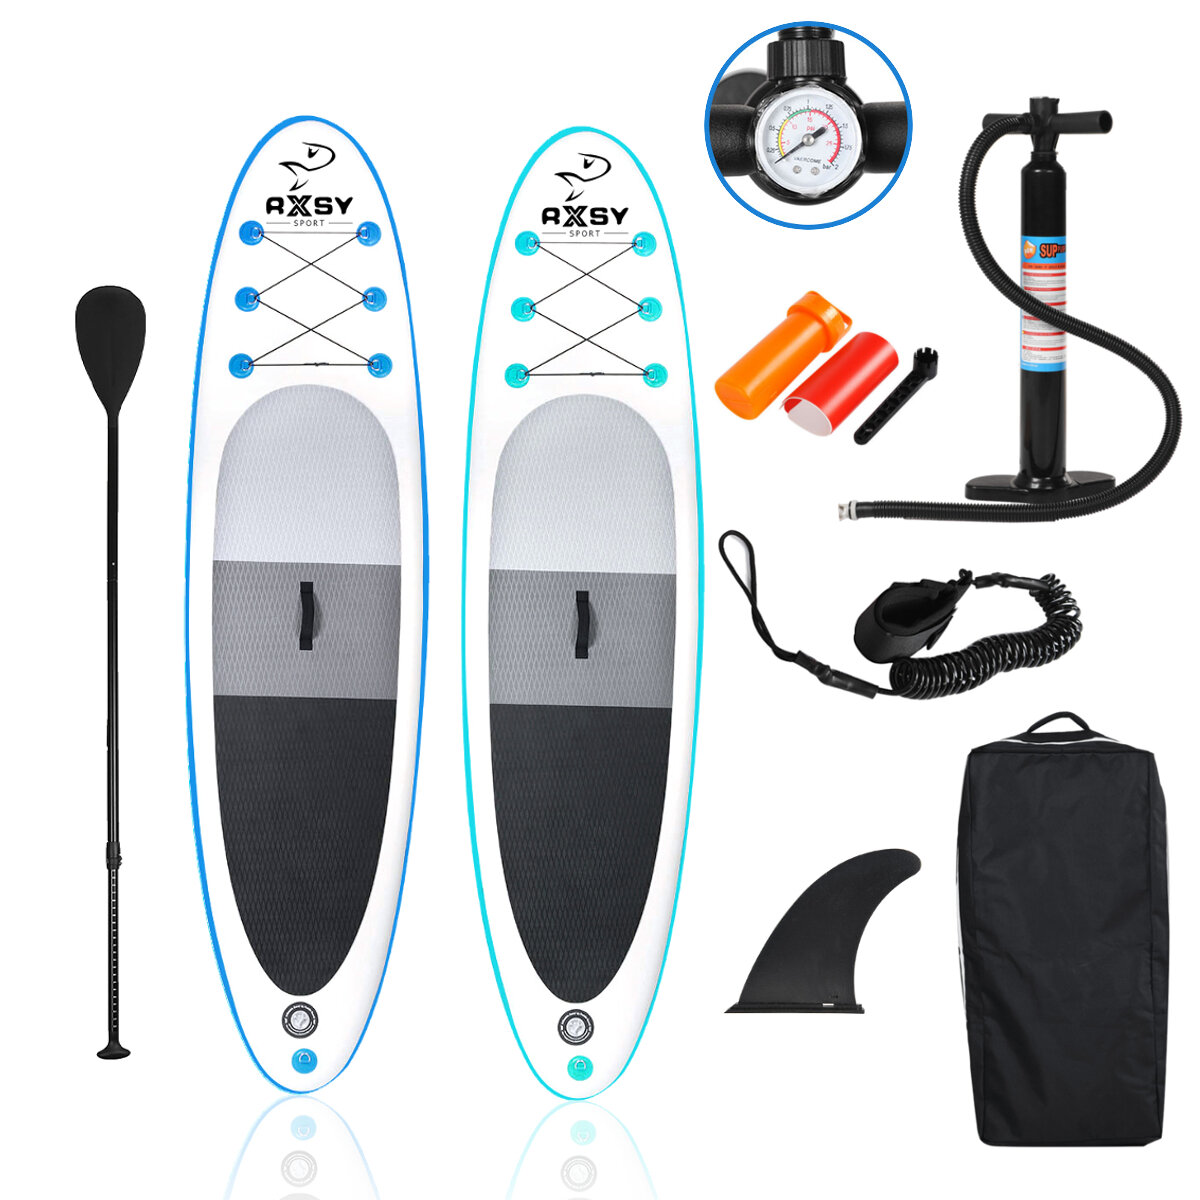 Image of RXSY 105' 320CM Inflatable Stand Up Surfing SUP Paddle Board Set Portable Anti-slip with Side Ailerons Backpack Repair